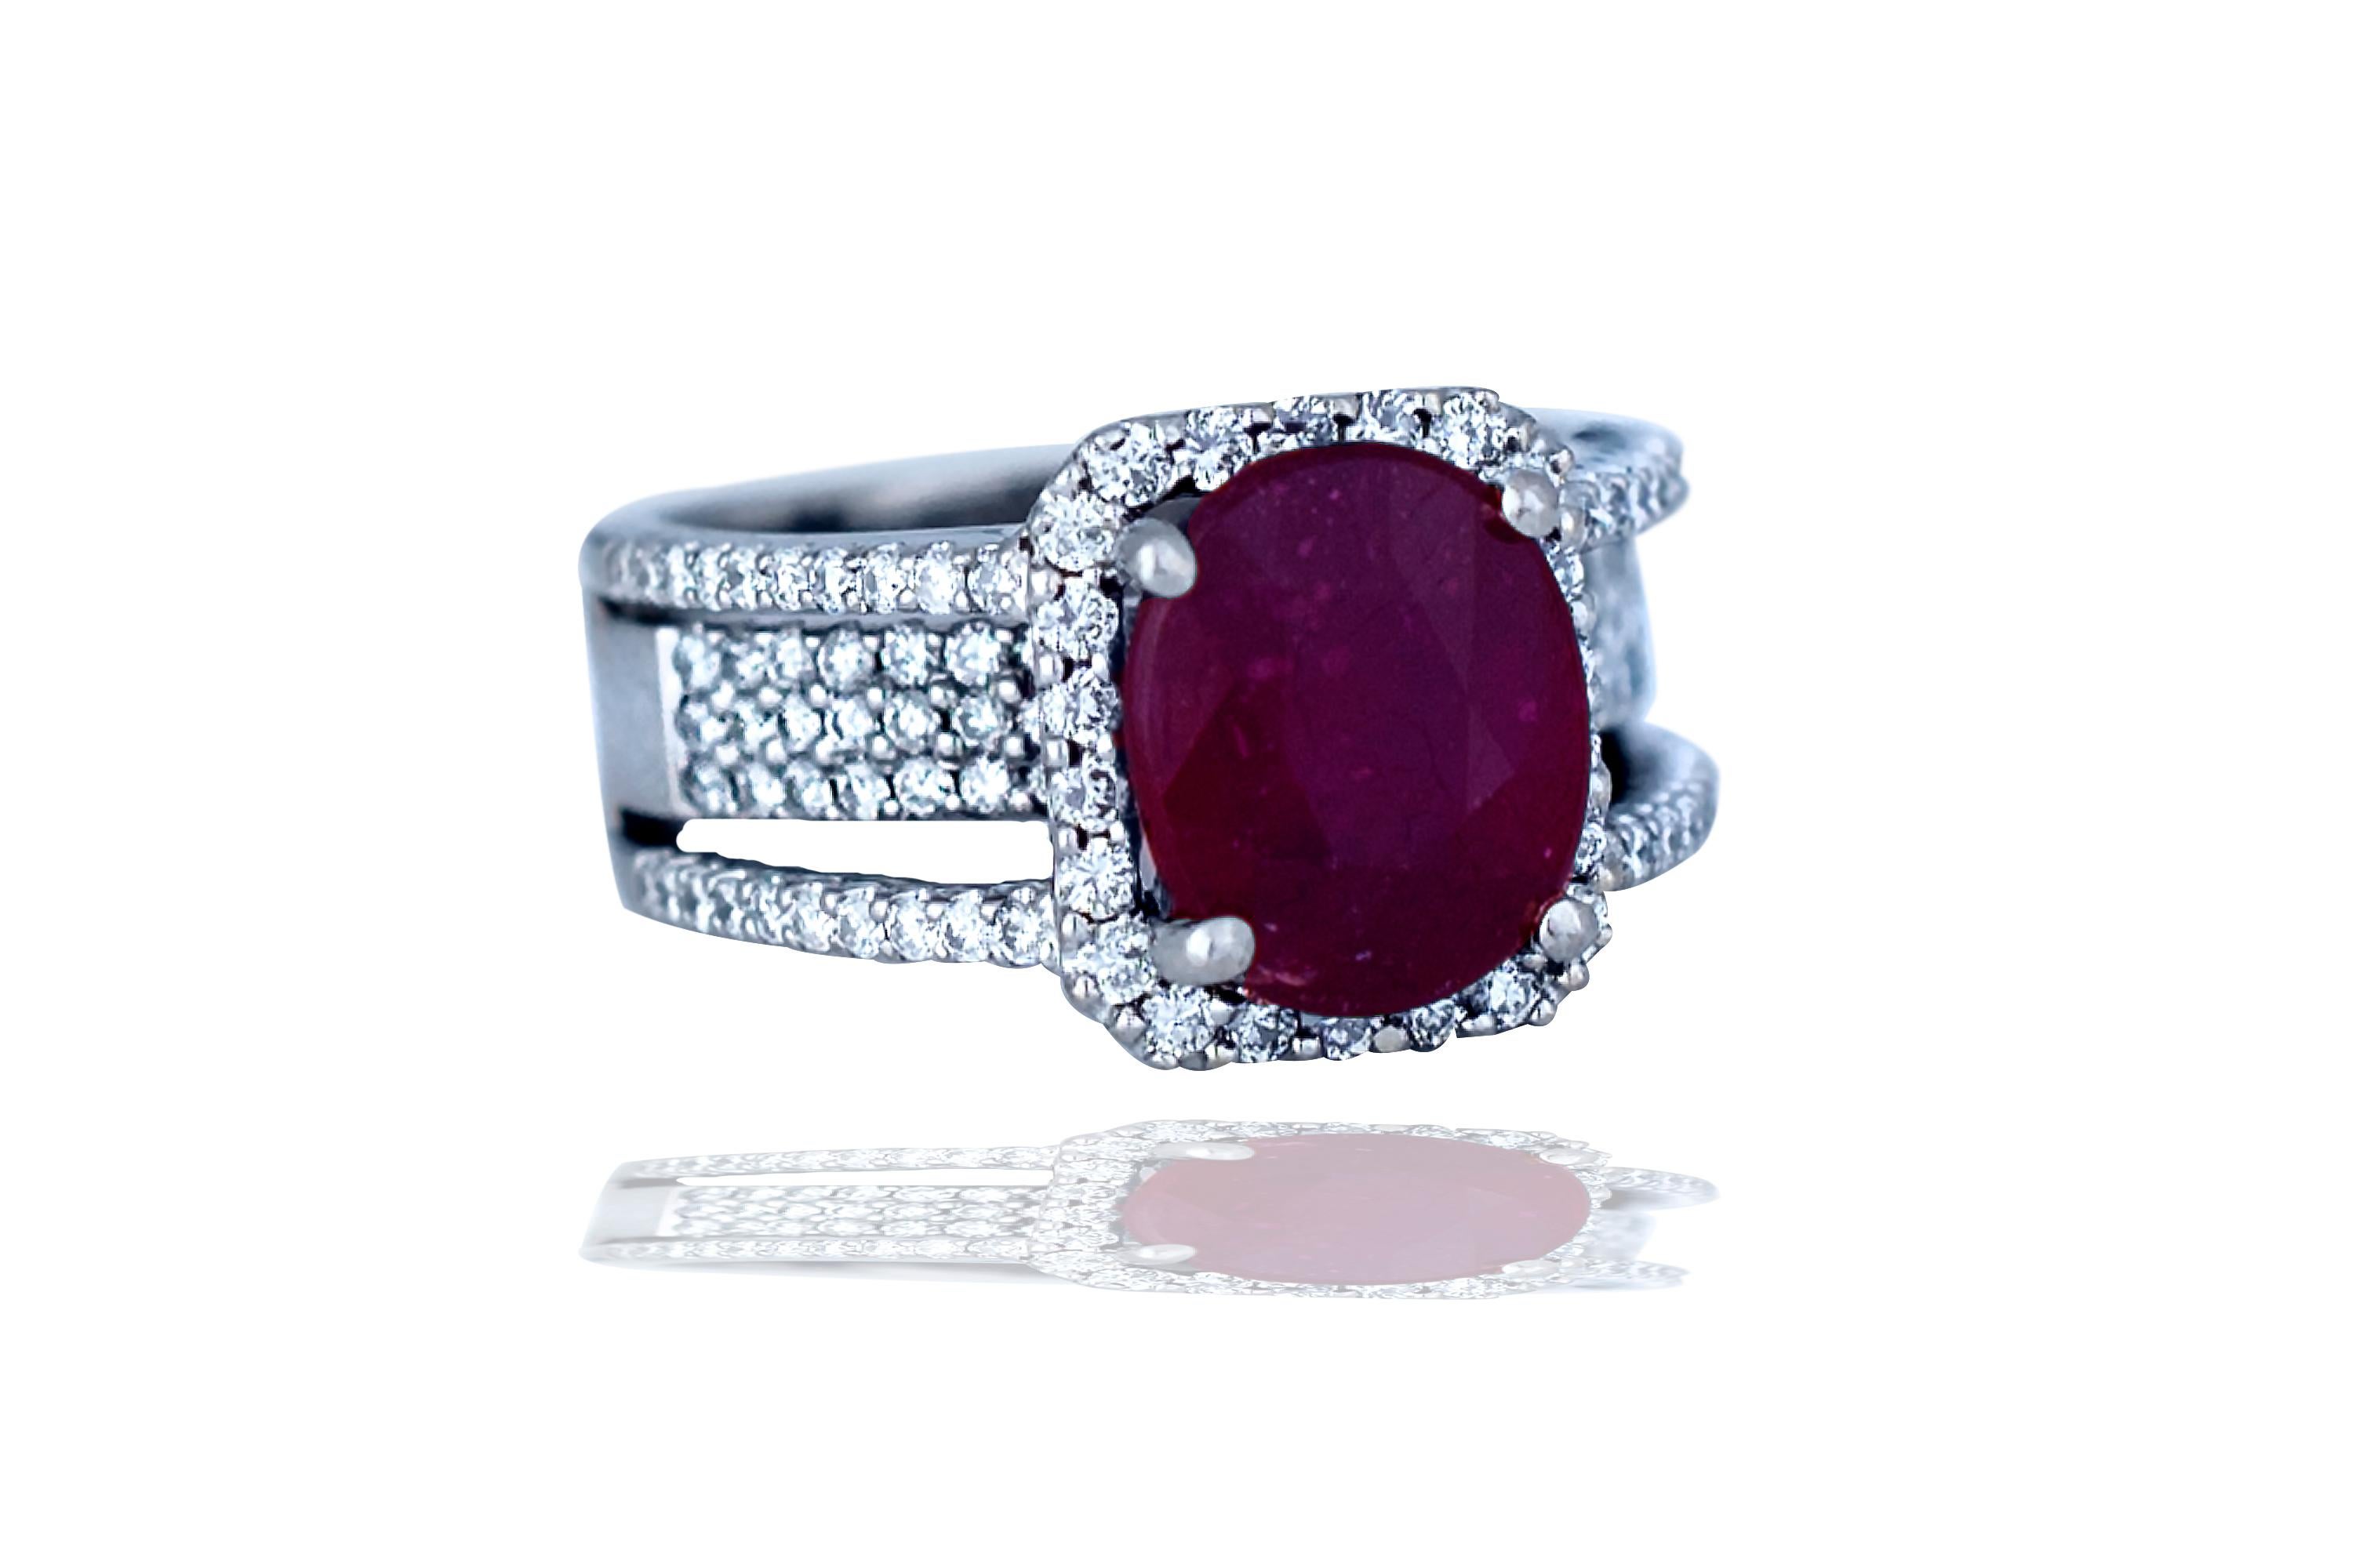 This beautiful red ruby and diamond ring contains the following.  The center stone is apprx. 6 carats and oval in shape and has rich red slightly purple color.  The stone is fairly included as most rubies are.  The center stone is complimented by